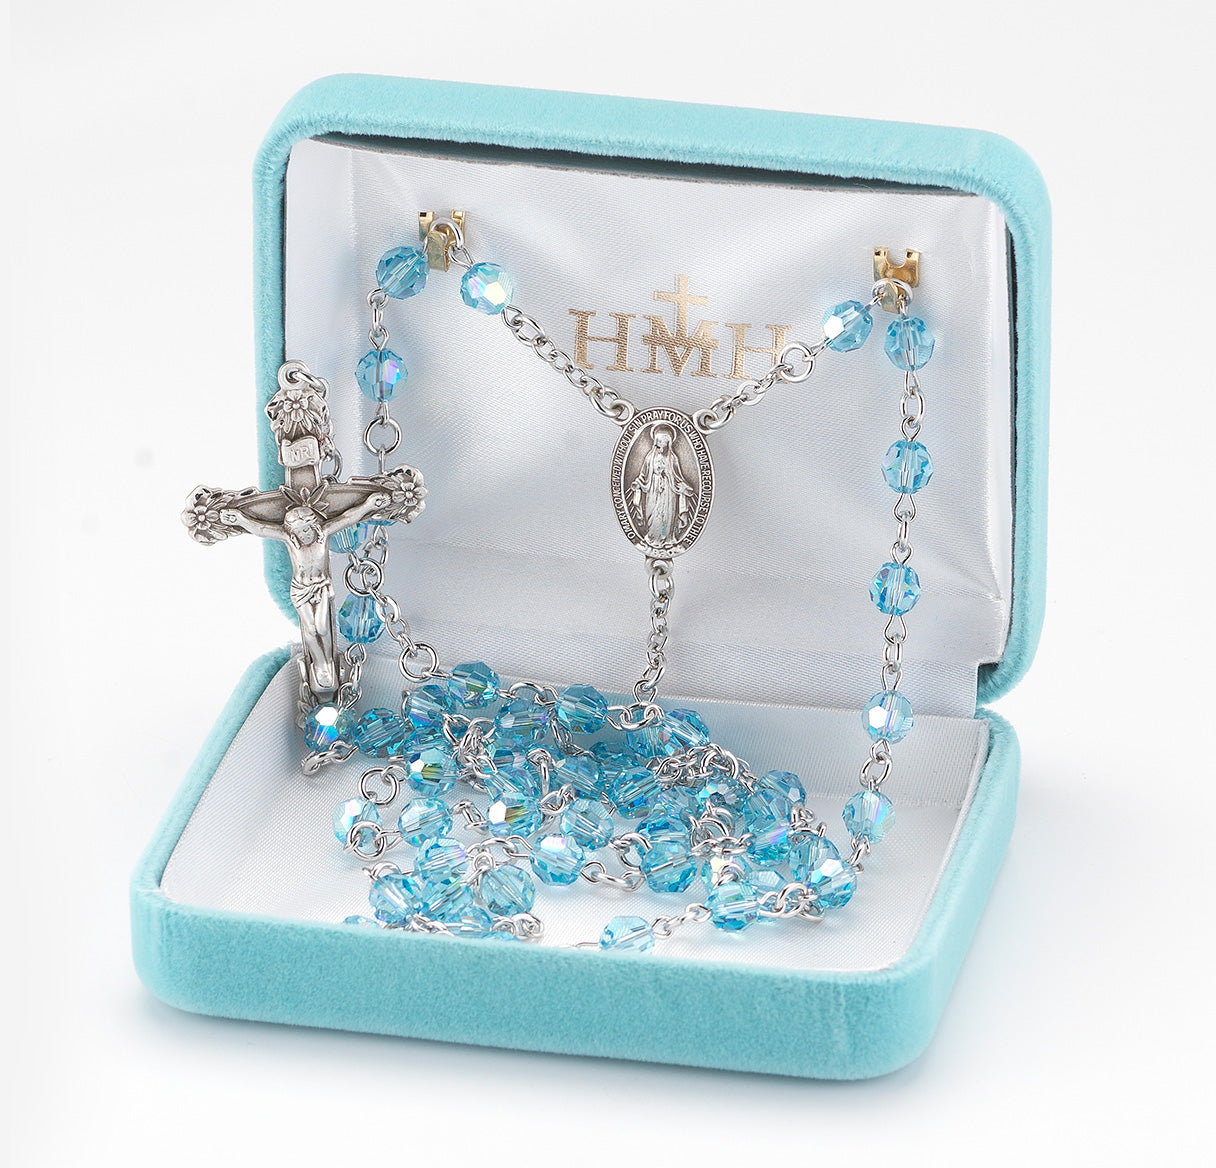 Rosary Sterling Crucifix and Centerpiece Created with Swarovski Crystal 6mm Faceted Round Aqua Beads by HMH